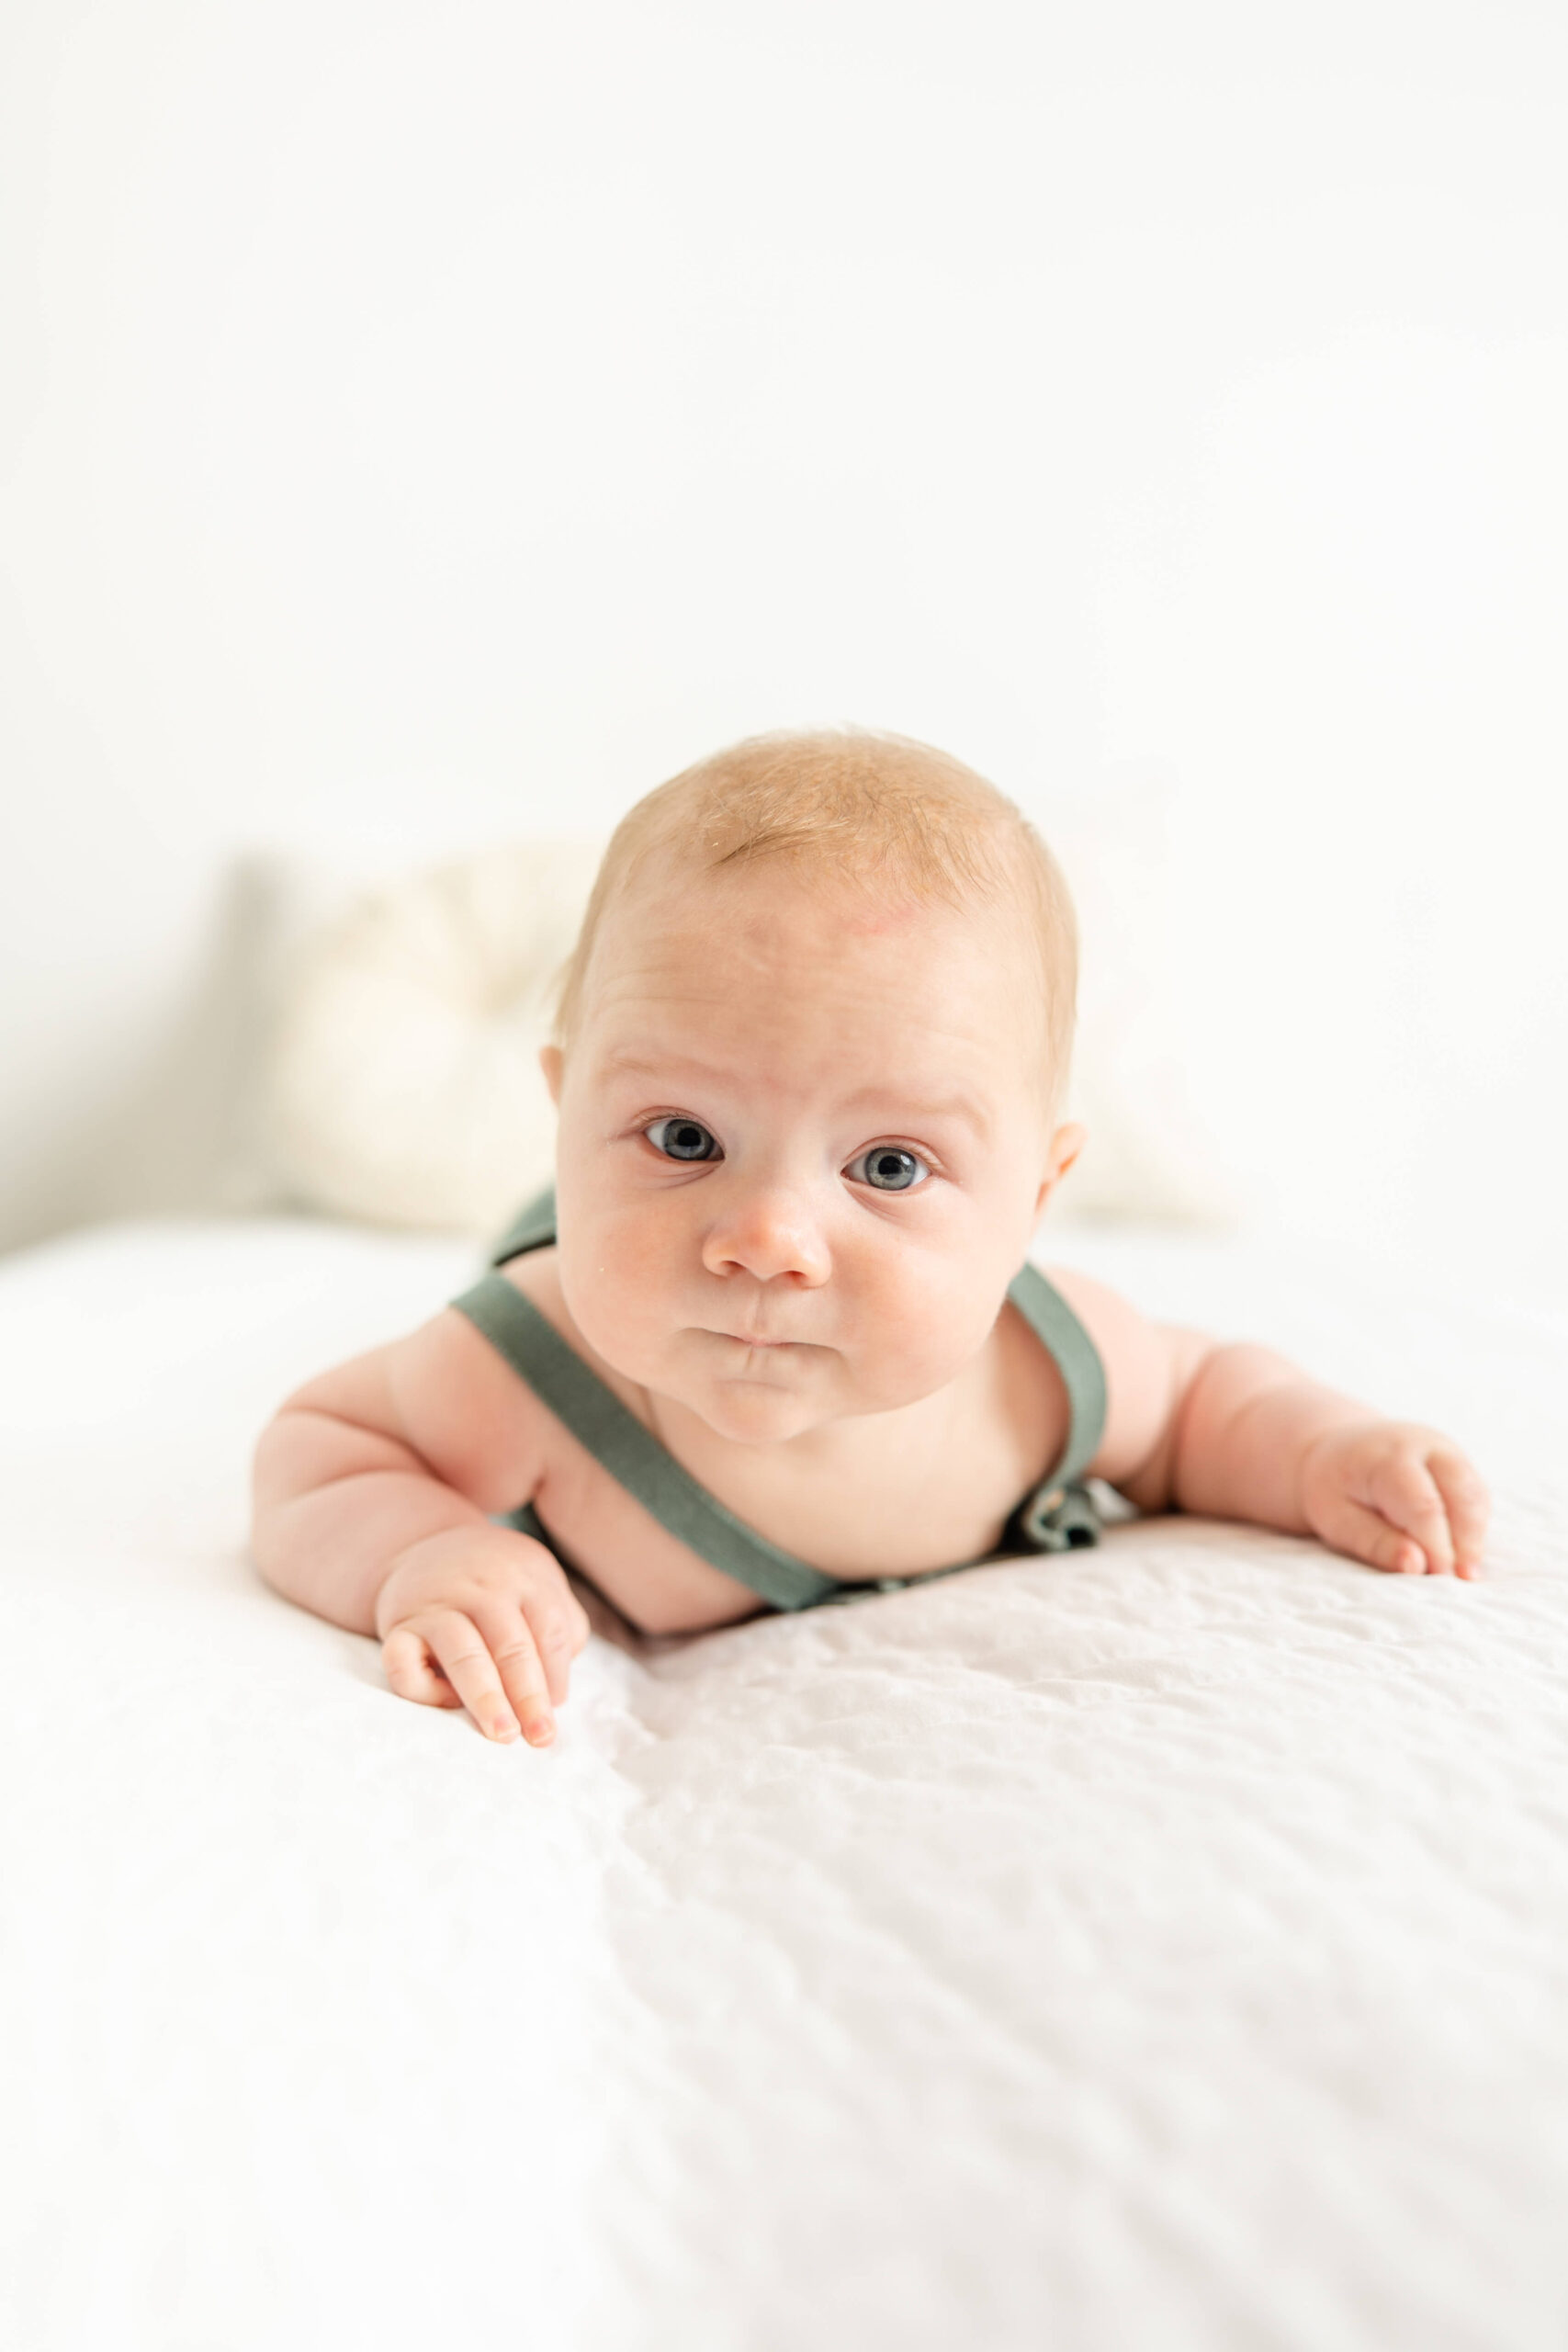 Handsome little man captured during a motherhood session with Molly Berry Photography.